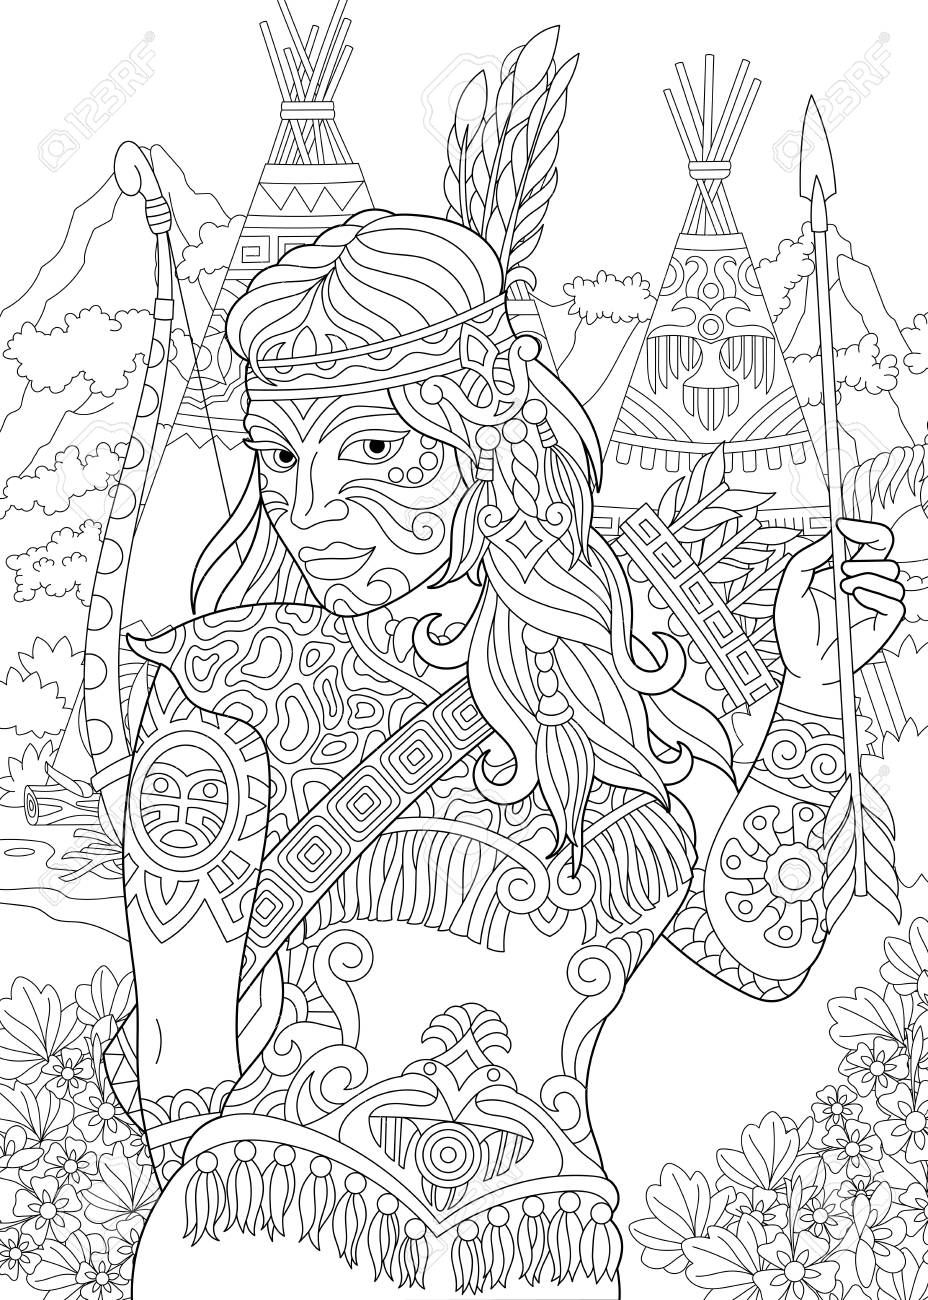 Coloring page adult coloring book native american indian woman navajo ethnicity cherokee nation boho tribal culture antistress freehand sketch drawing with doodle and zentangle elements royalty free svg cliparts vectors and stock